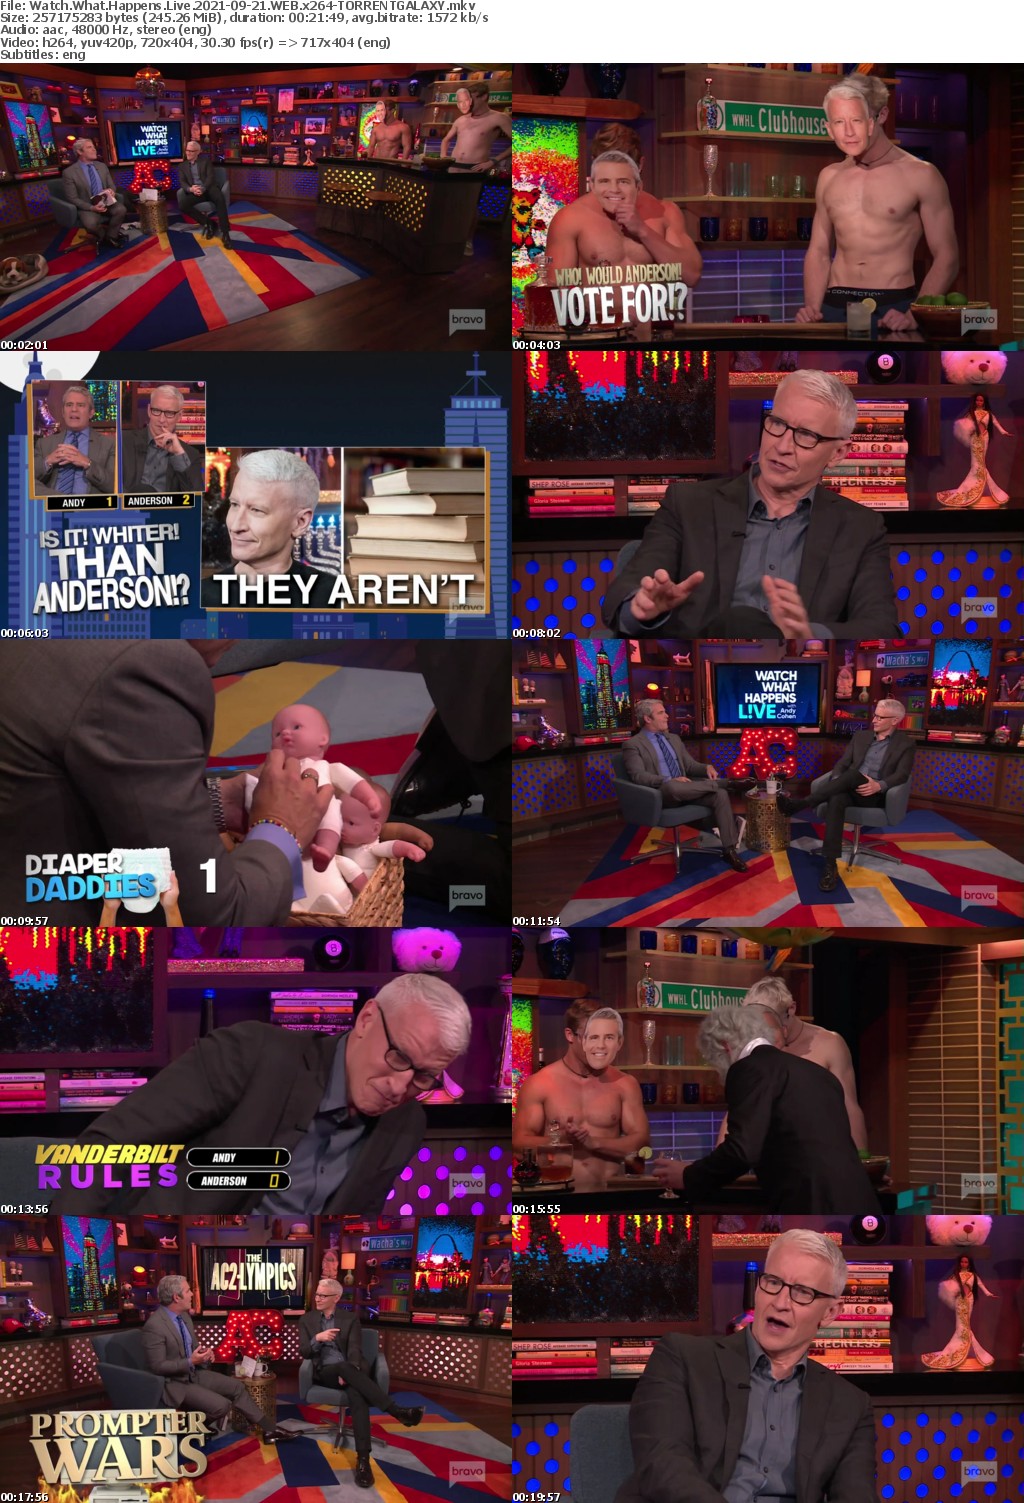 Watch What Happens Live 2021-09-21 WEB x264-GALAXY